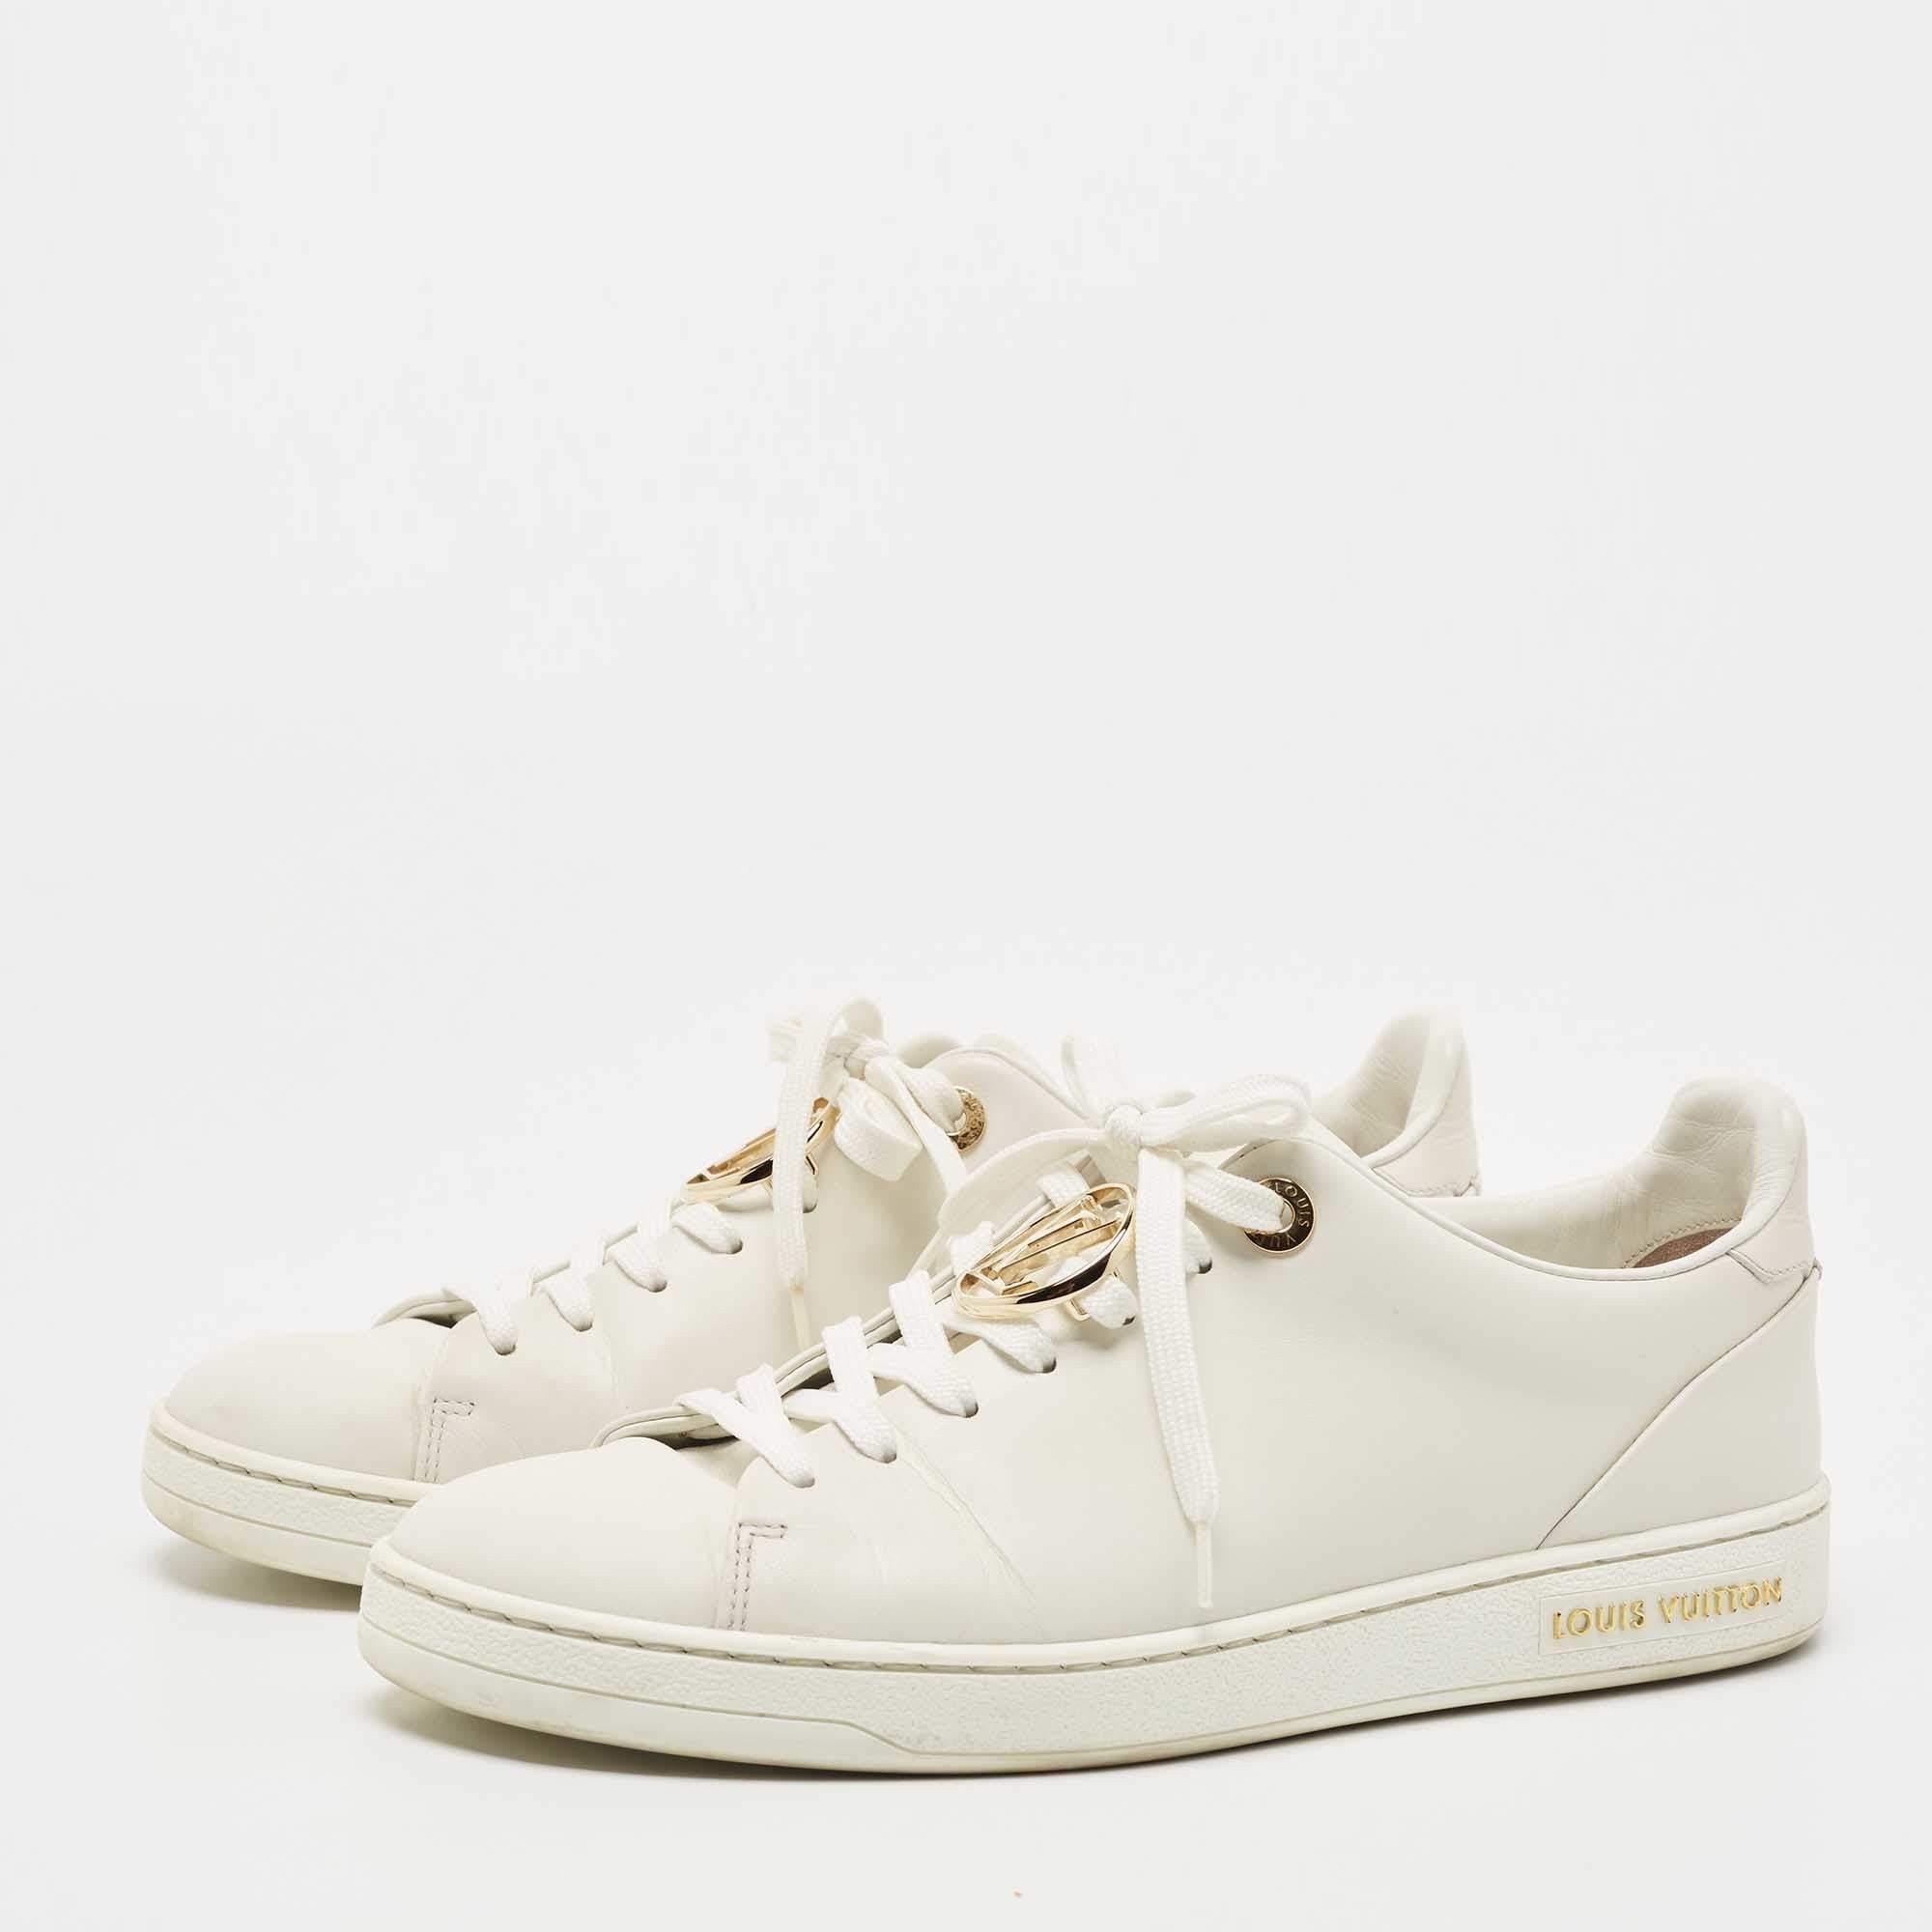 Louis Vuitton White Leather Frontrow Low Top Sneakers Size 37 3